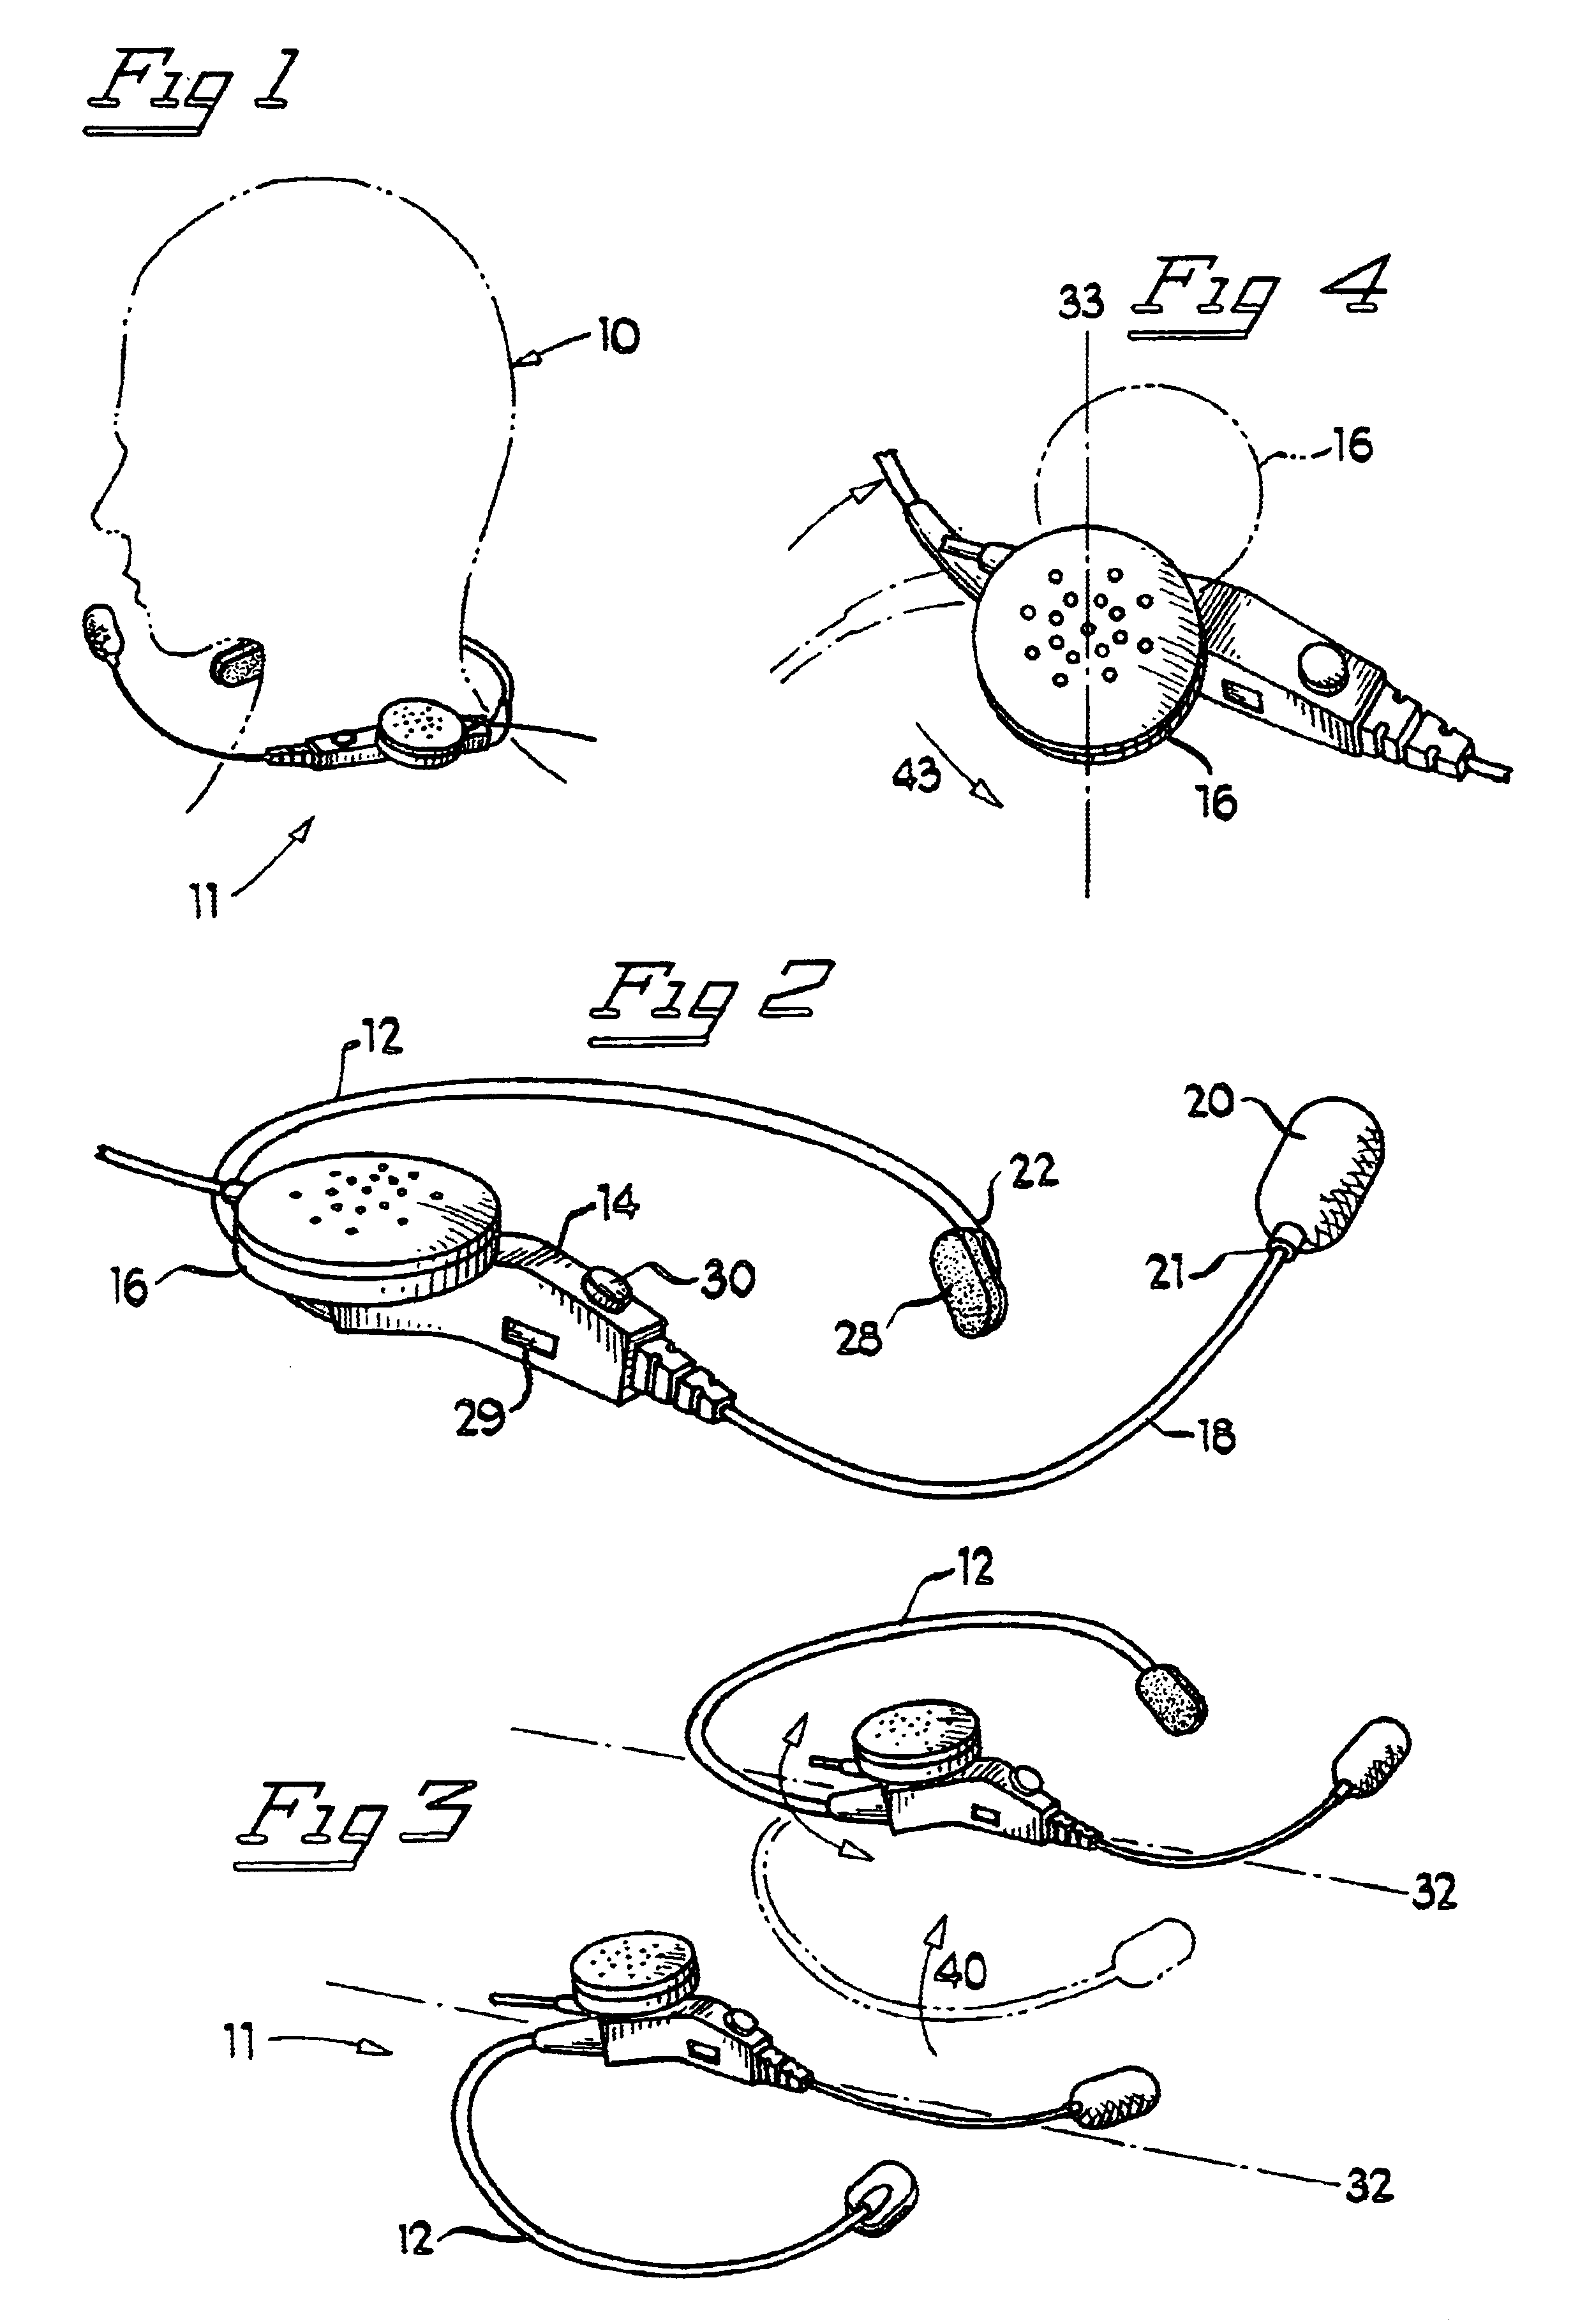 Personal wearable communication and speaker system